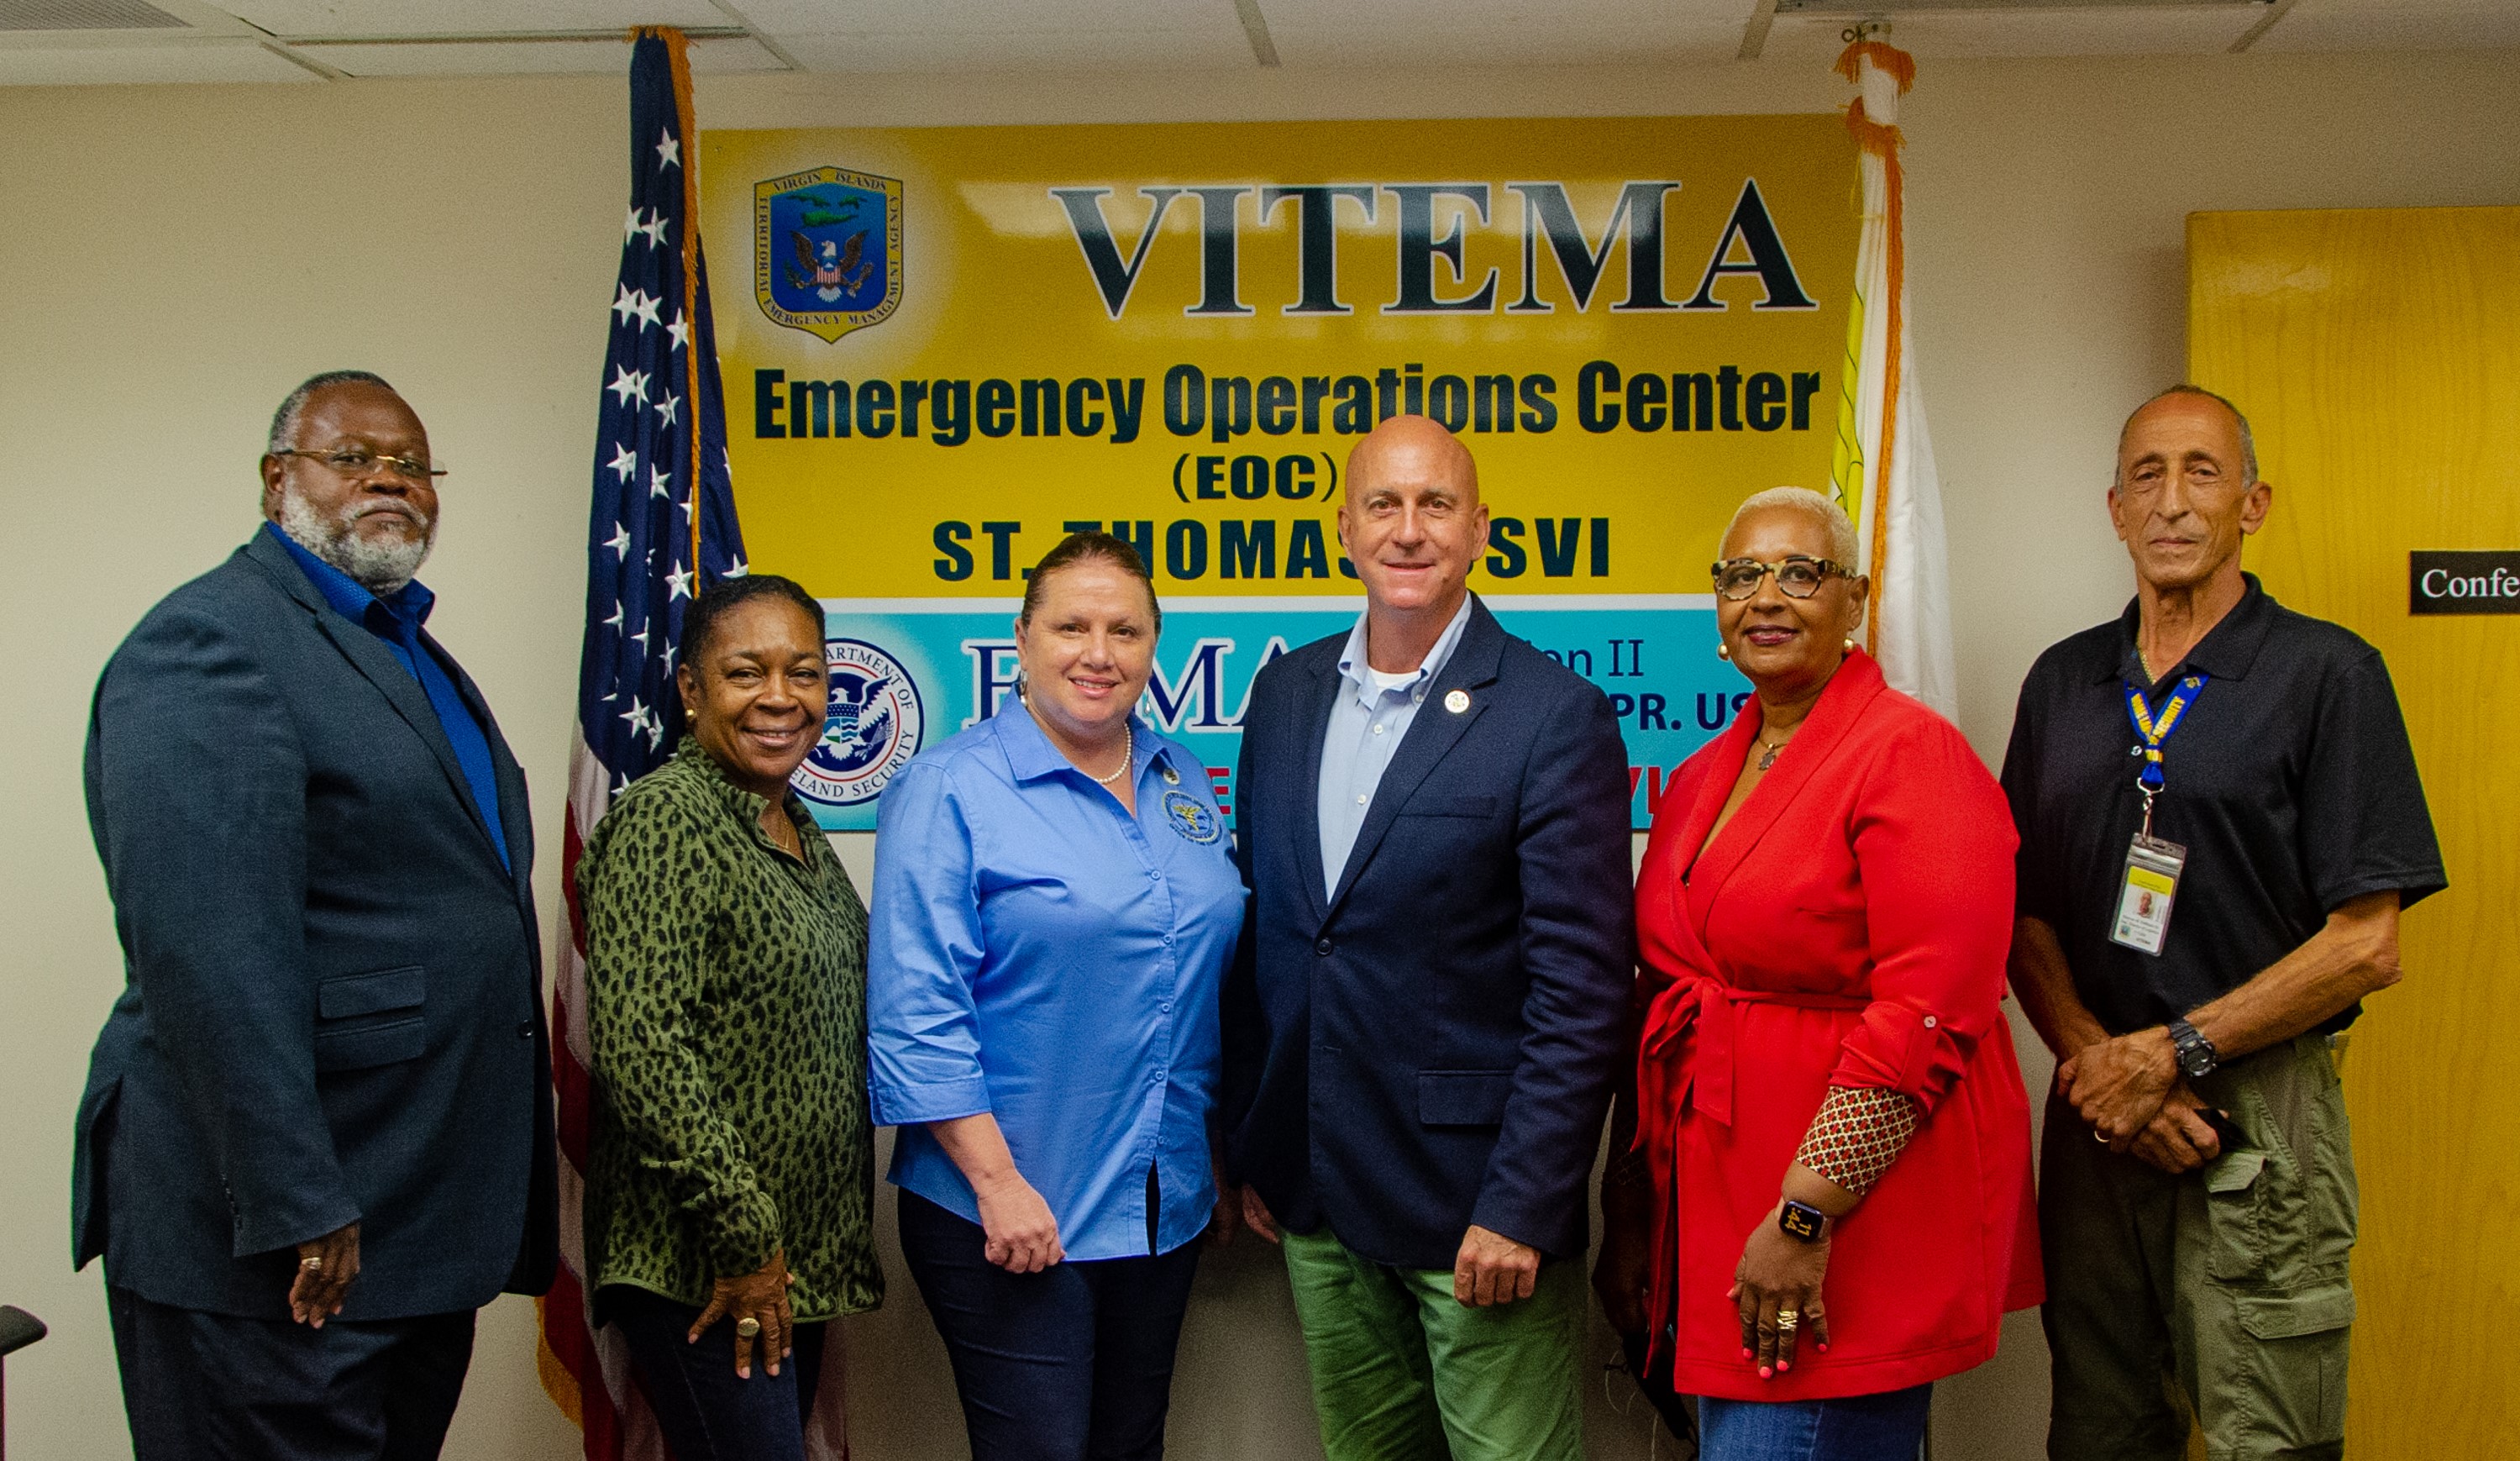  Reuben Molloy, Deputy Commissioner of the Virgin Islands Department of Health (from left), Yvette Henry, Community Affairs Coordinator for the Virgin Islands Department of Human Services, Justa Encarnacion, Commissioner of the V.I. Department of Health, Daryl Jaschen, Director of the Virgin Islands Territorial Emergency Management Agency, Barbara Petersen, Assistant Director of VITEMA and Steve DeBlasio, Deputy Director, Logistics for VITEMA, gather during the 2021 Capstone hurricane season preparedness.